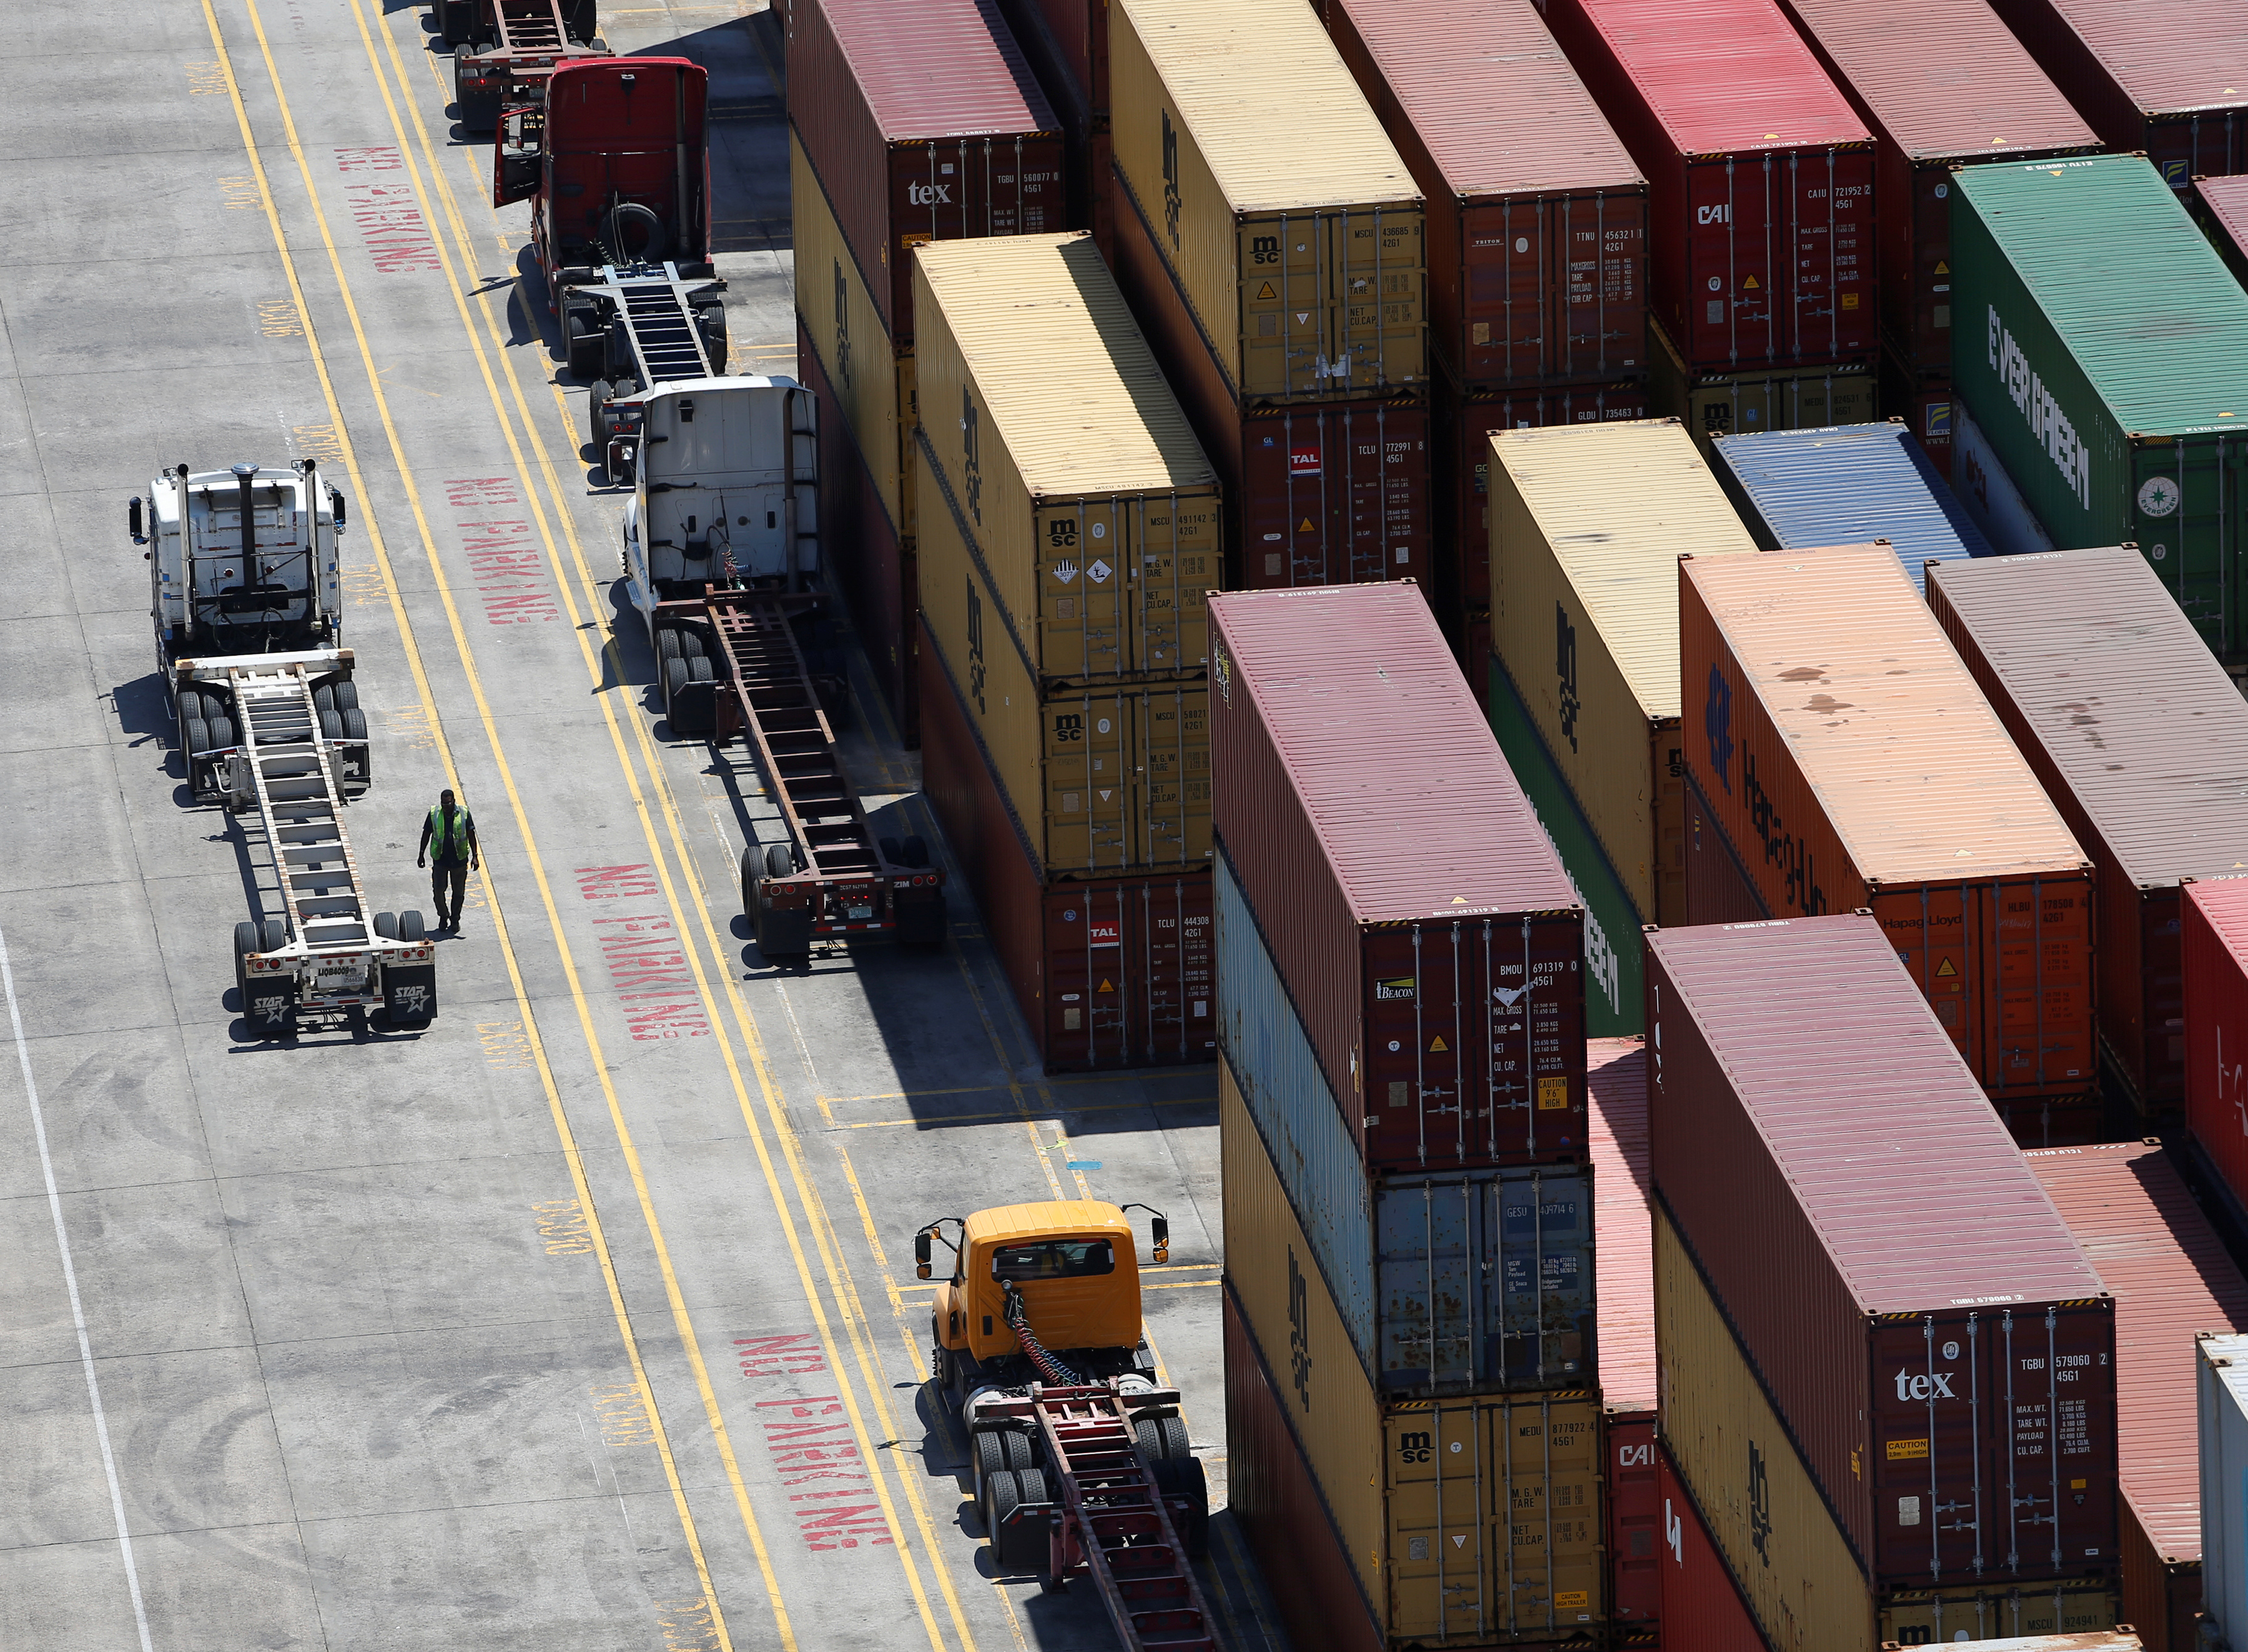 Workers stack empty shipping containers for storage at Wando Welch Terminal operated by the South Carolina Ports Authority in Mount Pleasant